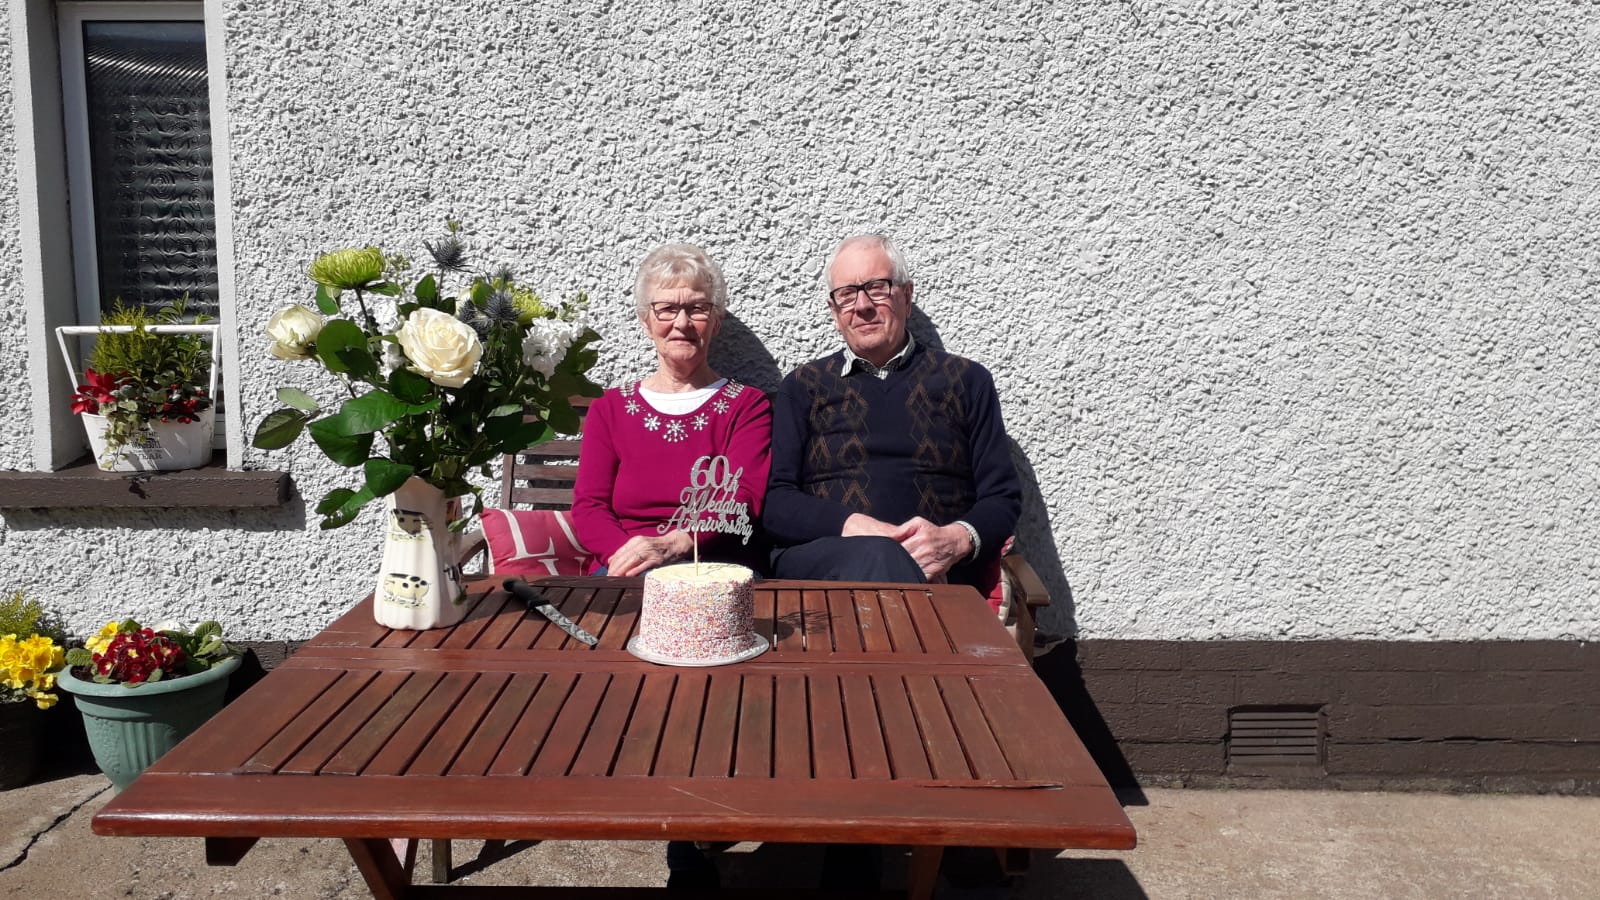 ‘Much loved’ couple celebrate 60 years of marriage